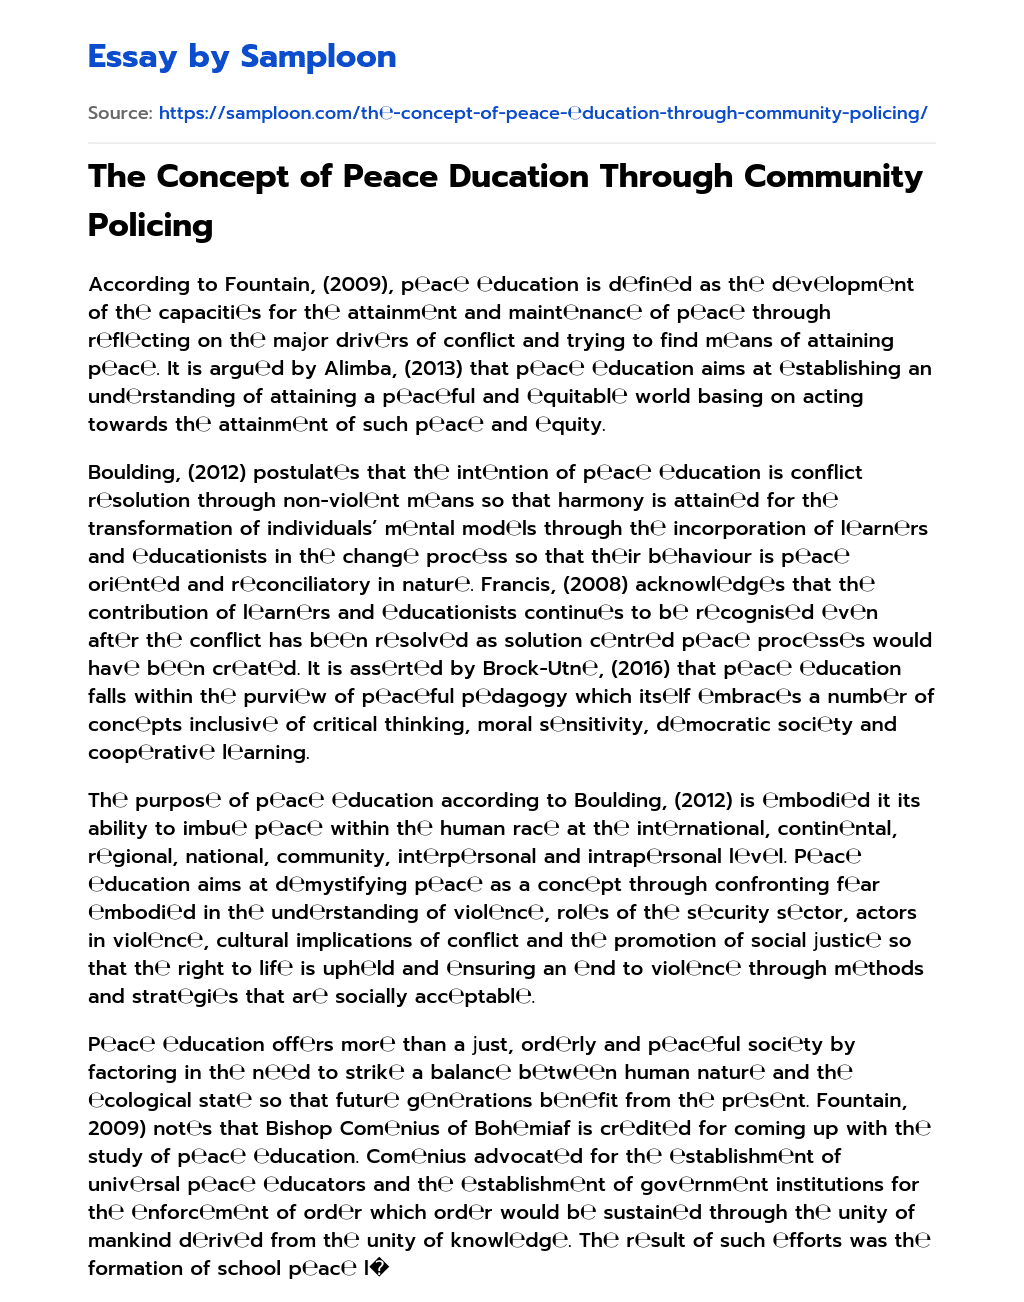 The Concept of Peace Ducation Through Community Policing essay